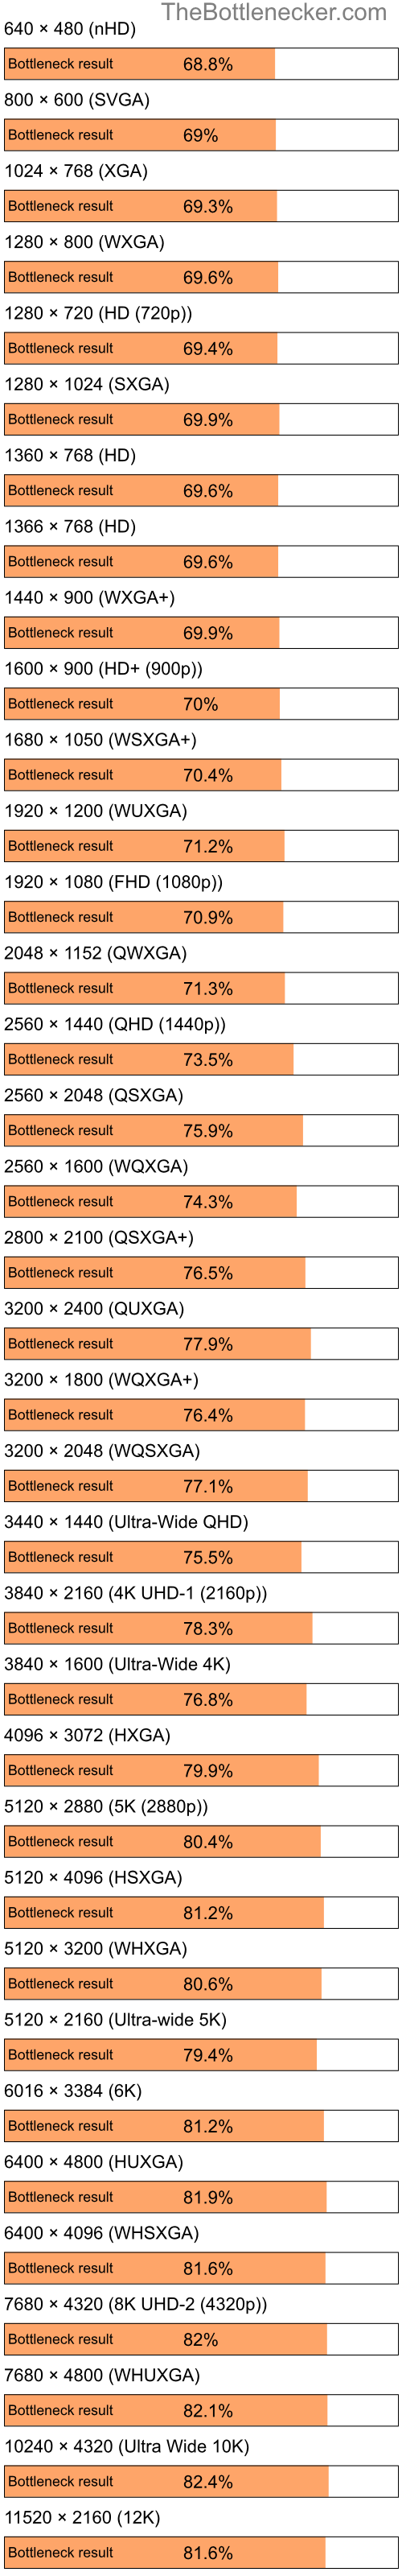 Bottleneck results by resolution for Intel Pentium 4 and NVIDIA GeForce nForce 630a in Processor Intense Tasks